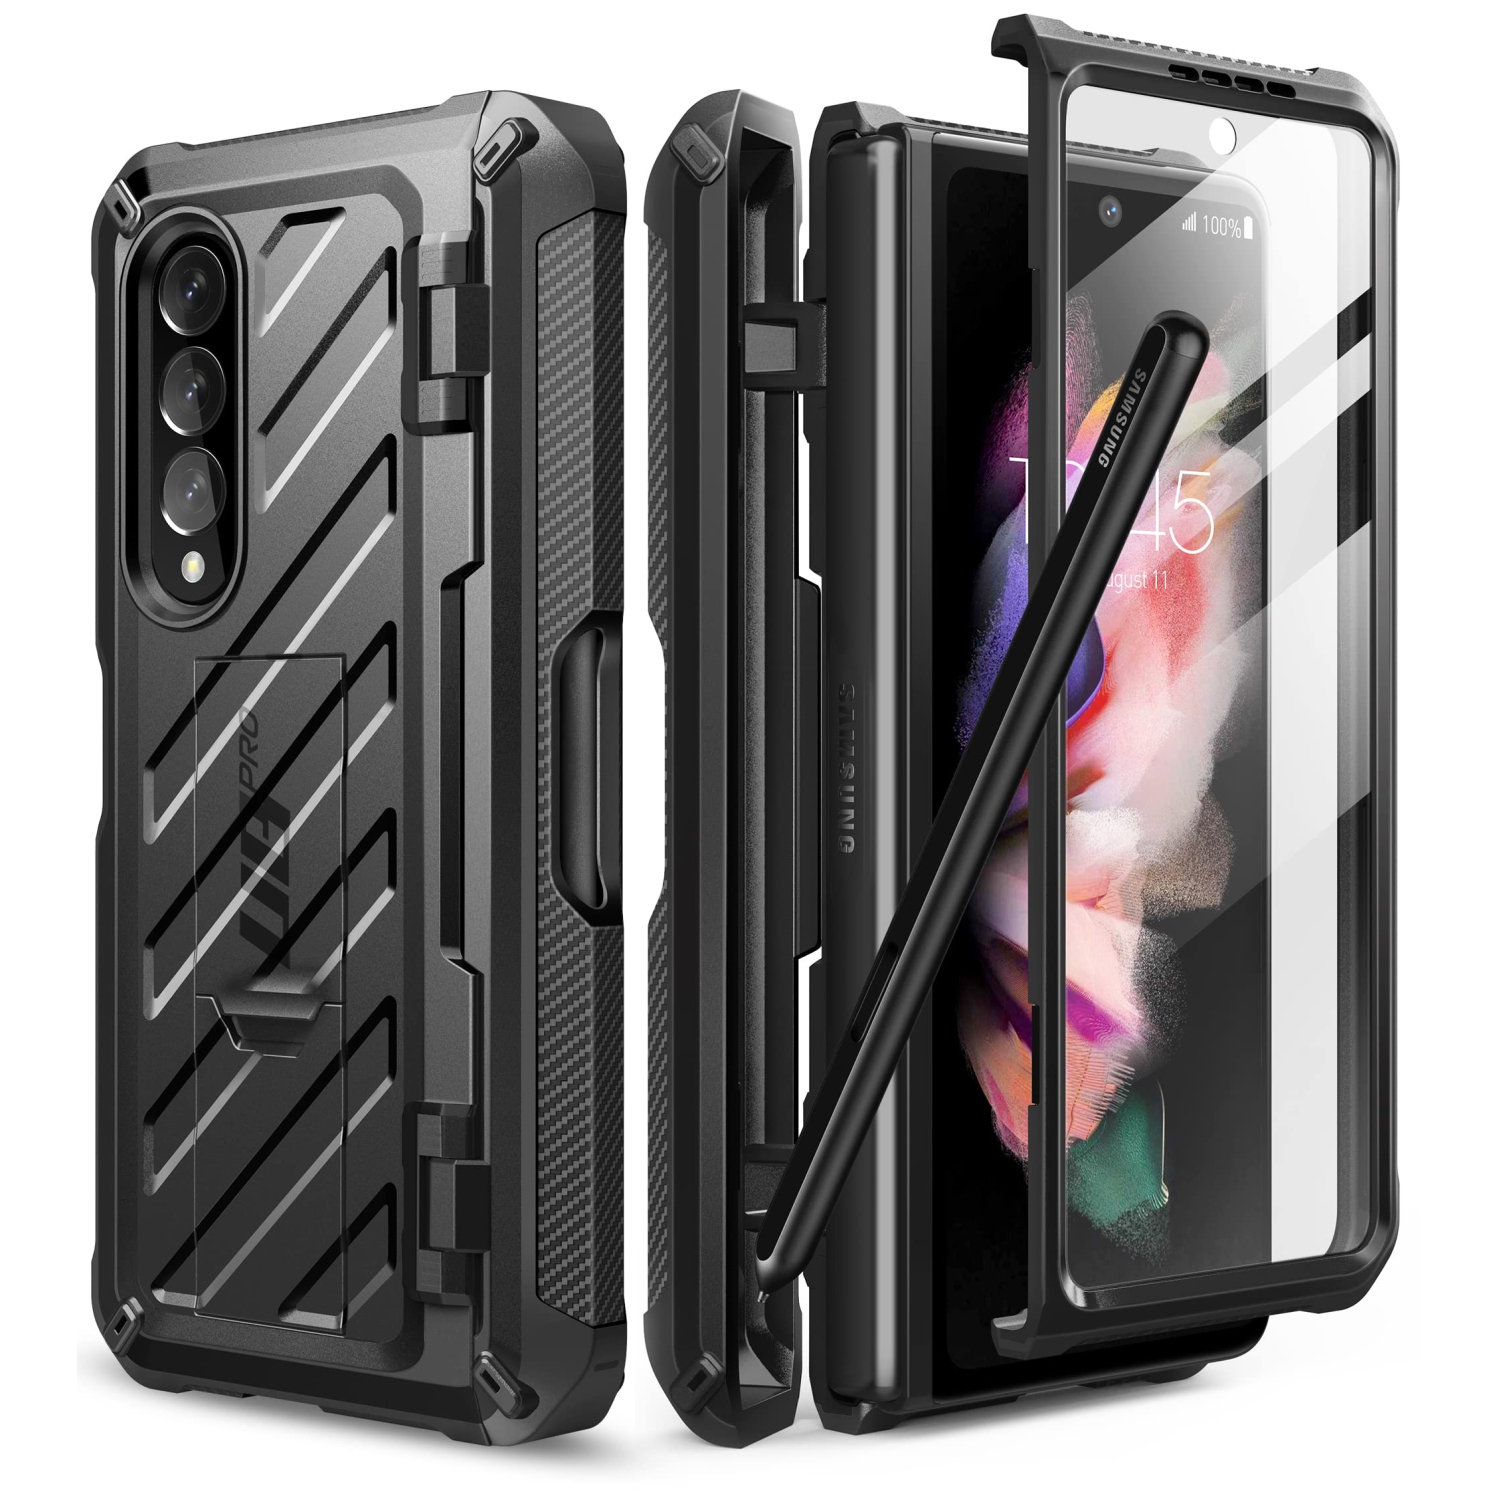 SUPCASE Unicorn Beetle Pro Series Case for Samsung Galaxy Z Fold 3 5G (2021), Full-Body Dual Layer Rugged Case with Built-in